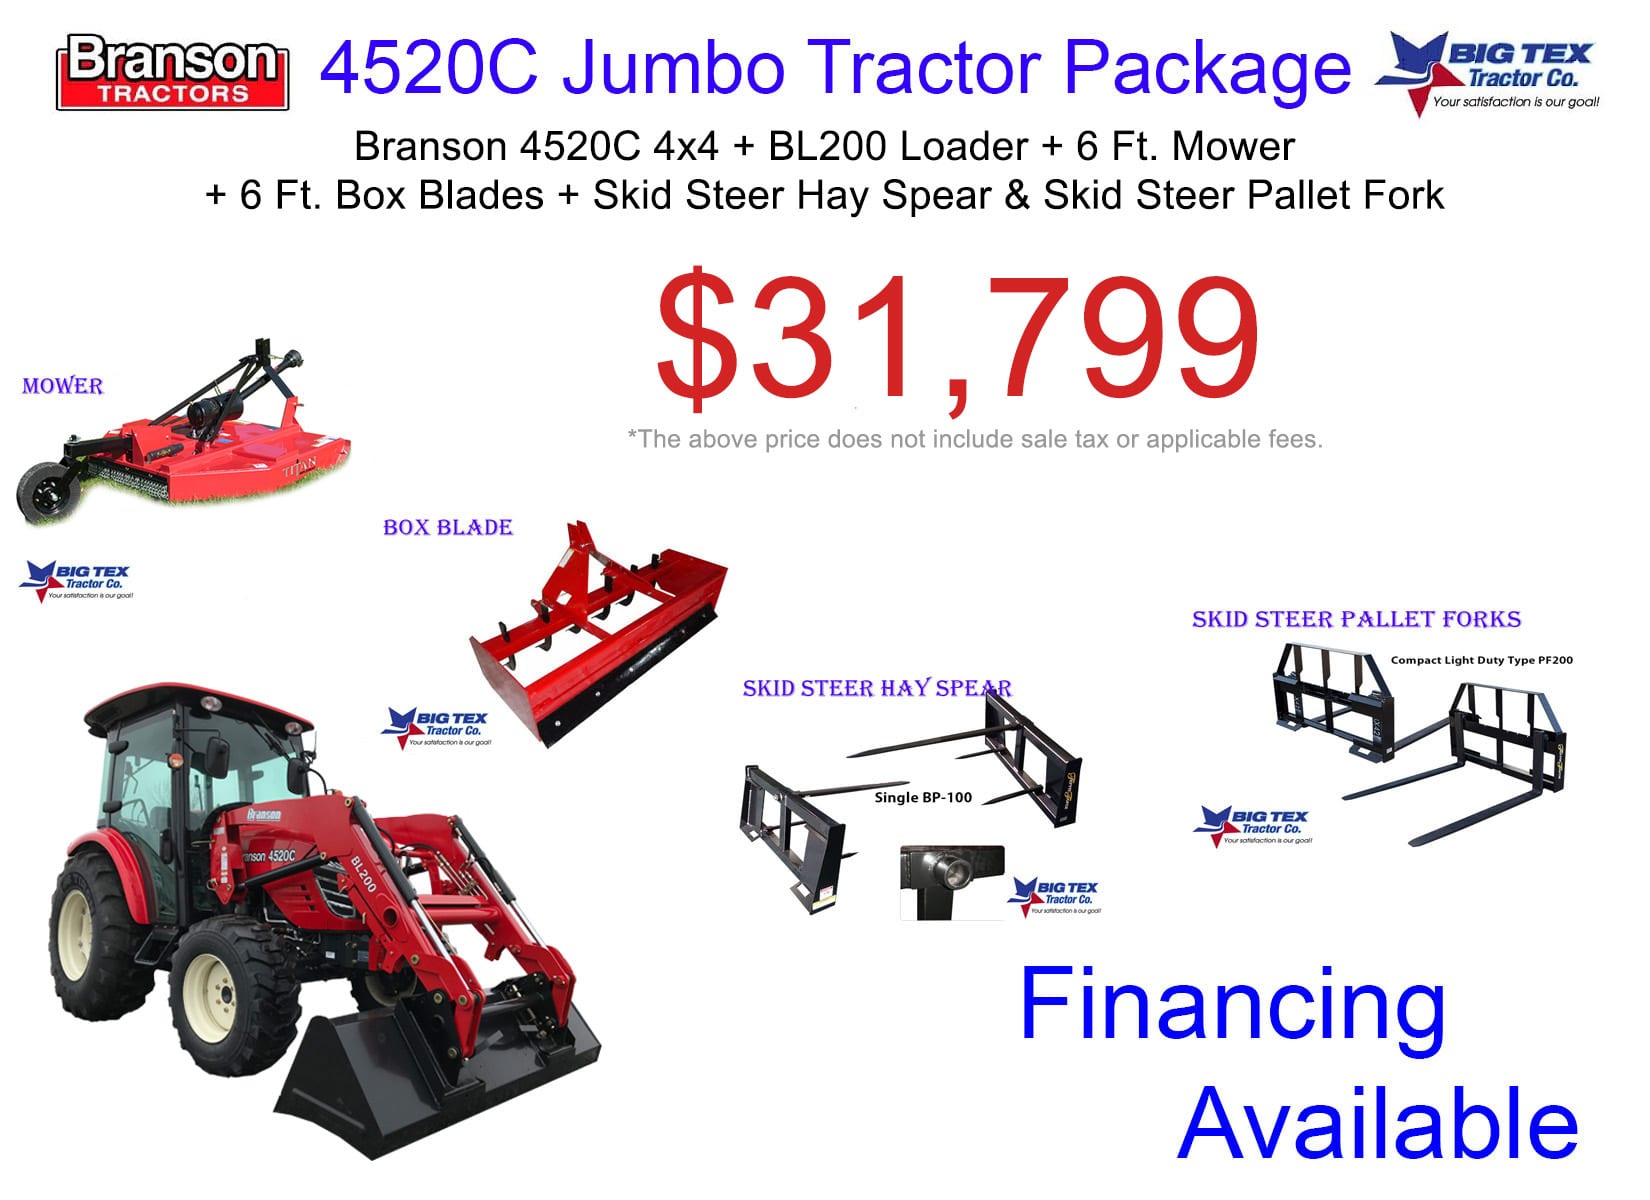 Tractor Package Deals Branson Tractor Packages Big Tex Tractor